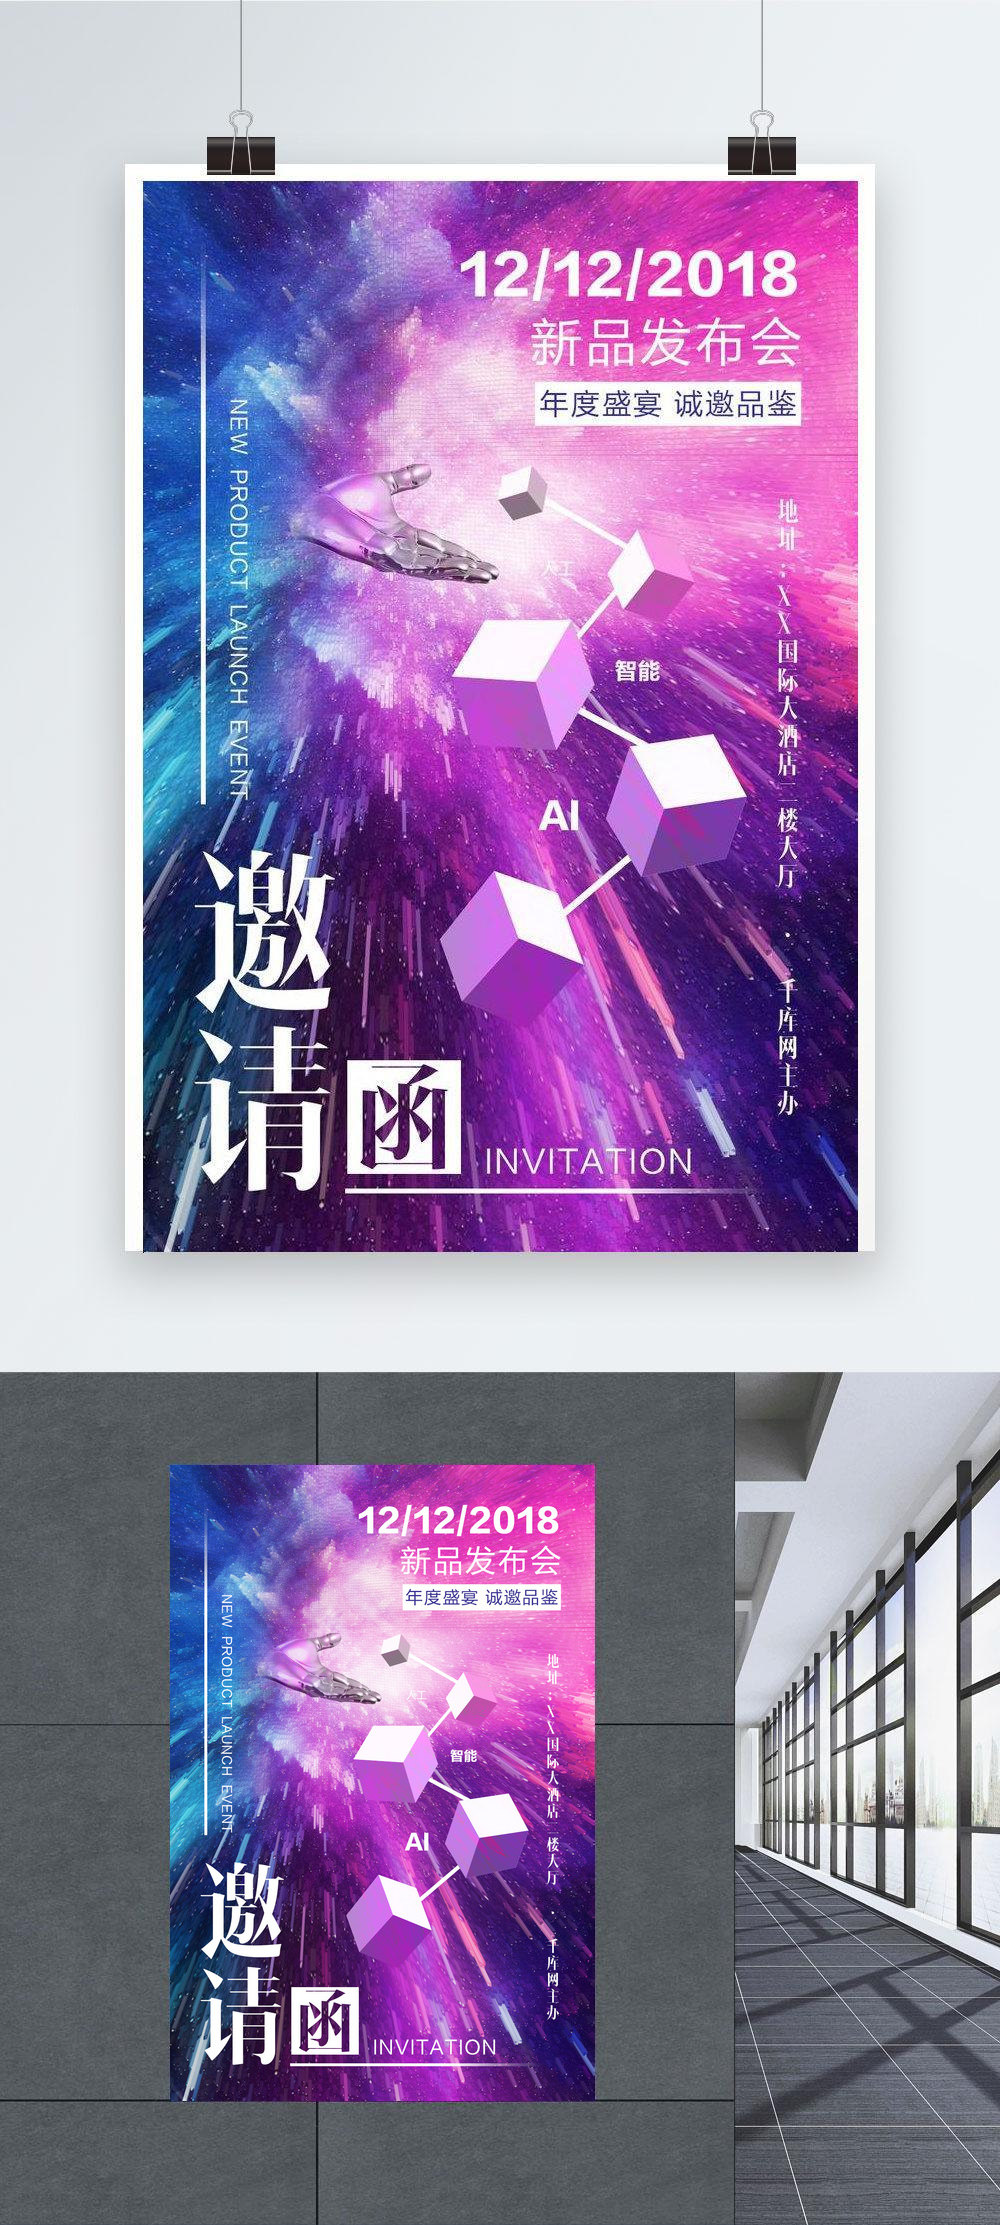 new-product-launch-invitation-color-nebula-poster-template-image